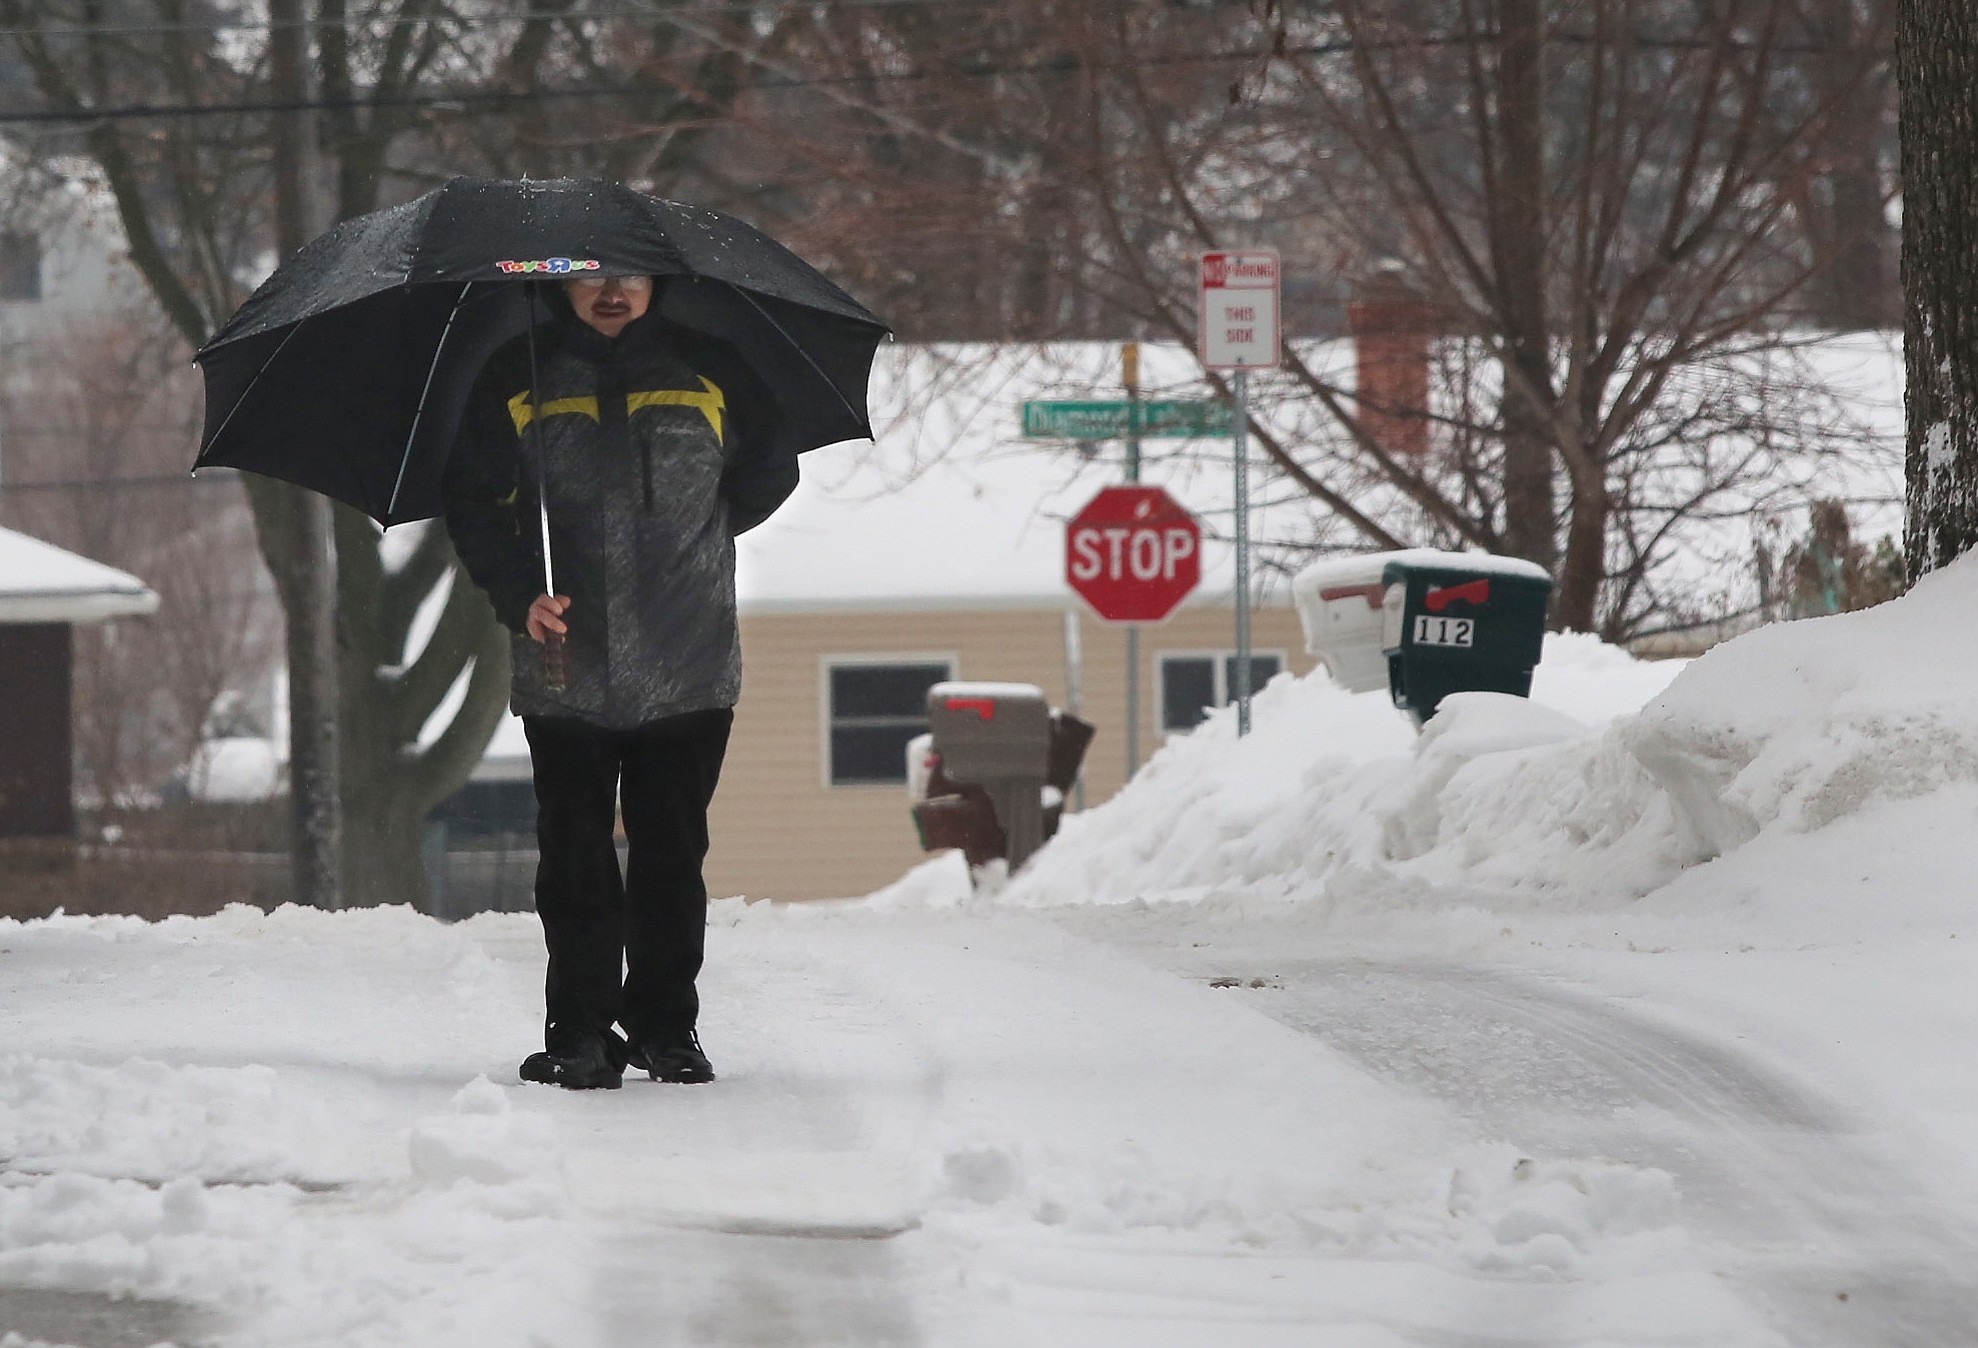 Mundelein, Ill., resident Ramon Marcos walks along Elm Avenue as an icy drizzle falls after early morning snow turned to rain Tuesday in Mundelein, Ill.